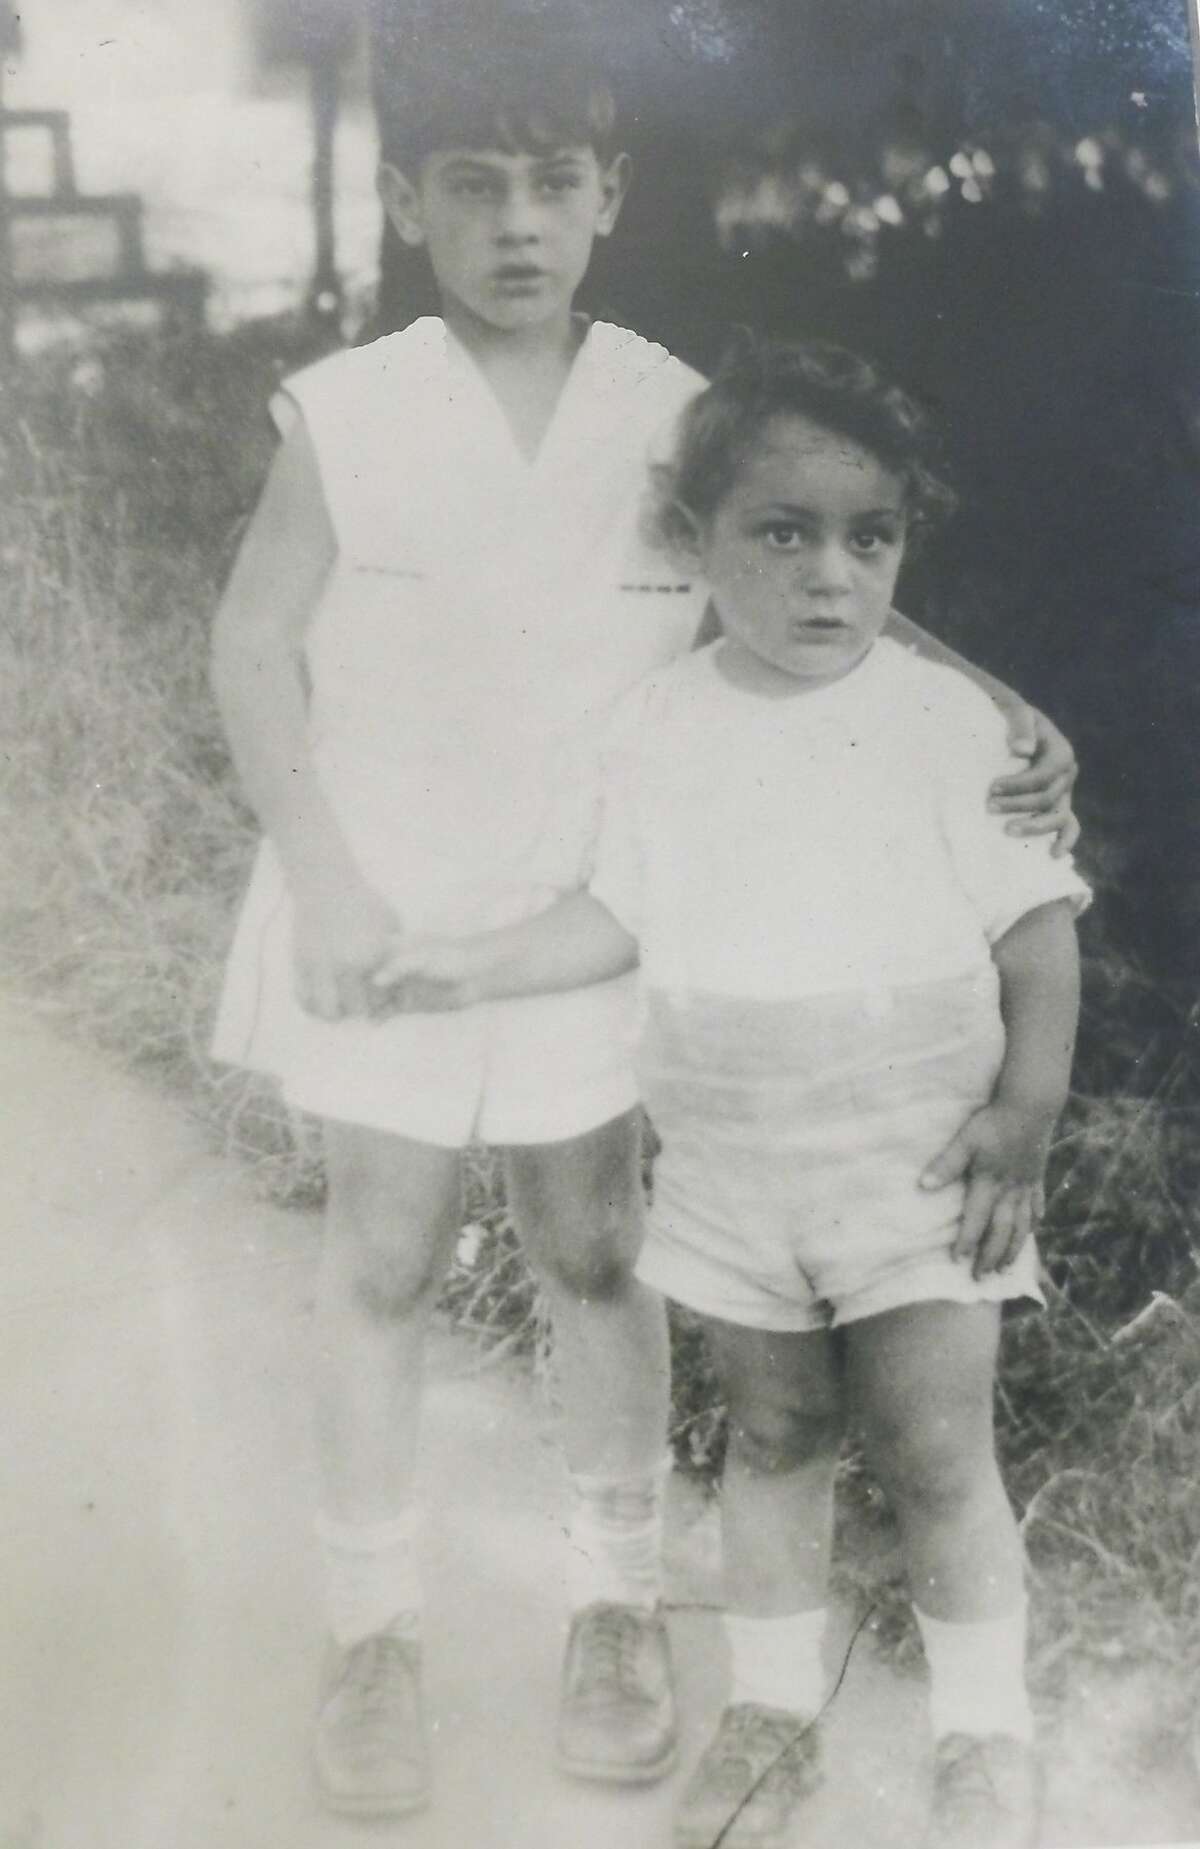 Harvey Milk (right), age three, with his brother, Robert, in 1933.